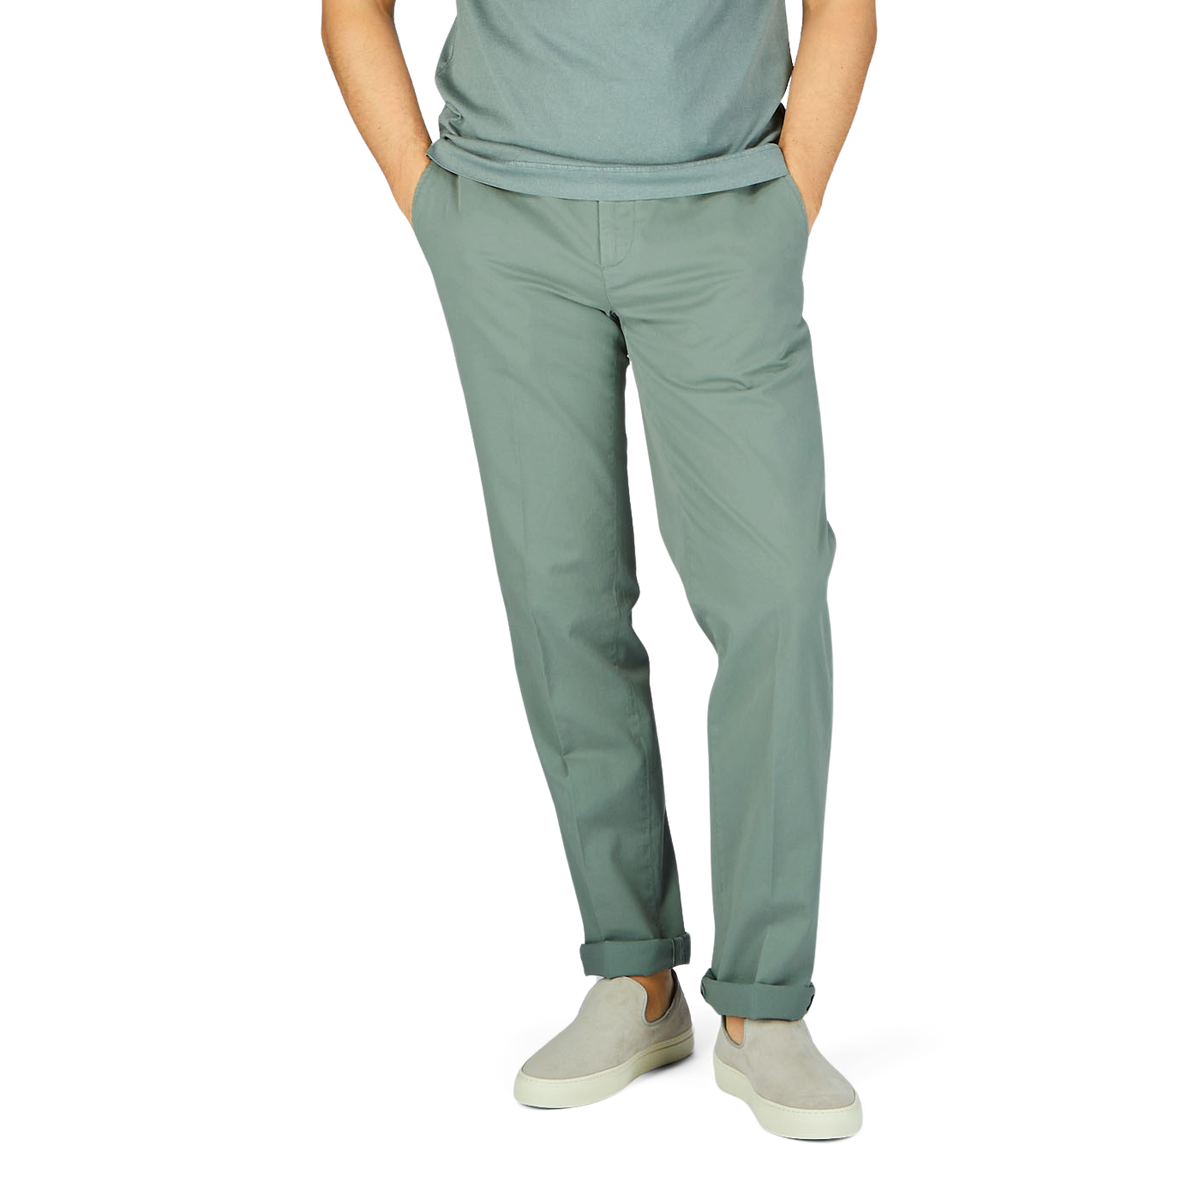 A man wearing Sage Green Cotton Stretch Flat Front Chinos from Canali and a white cotton shirt.